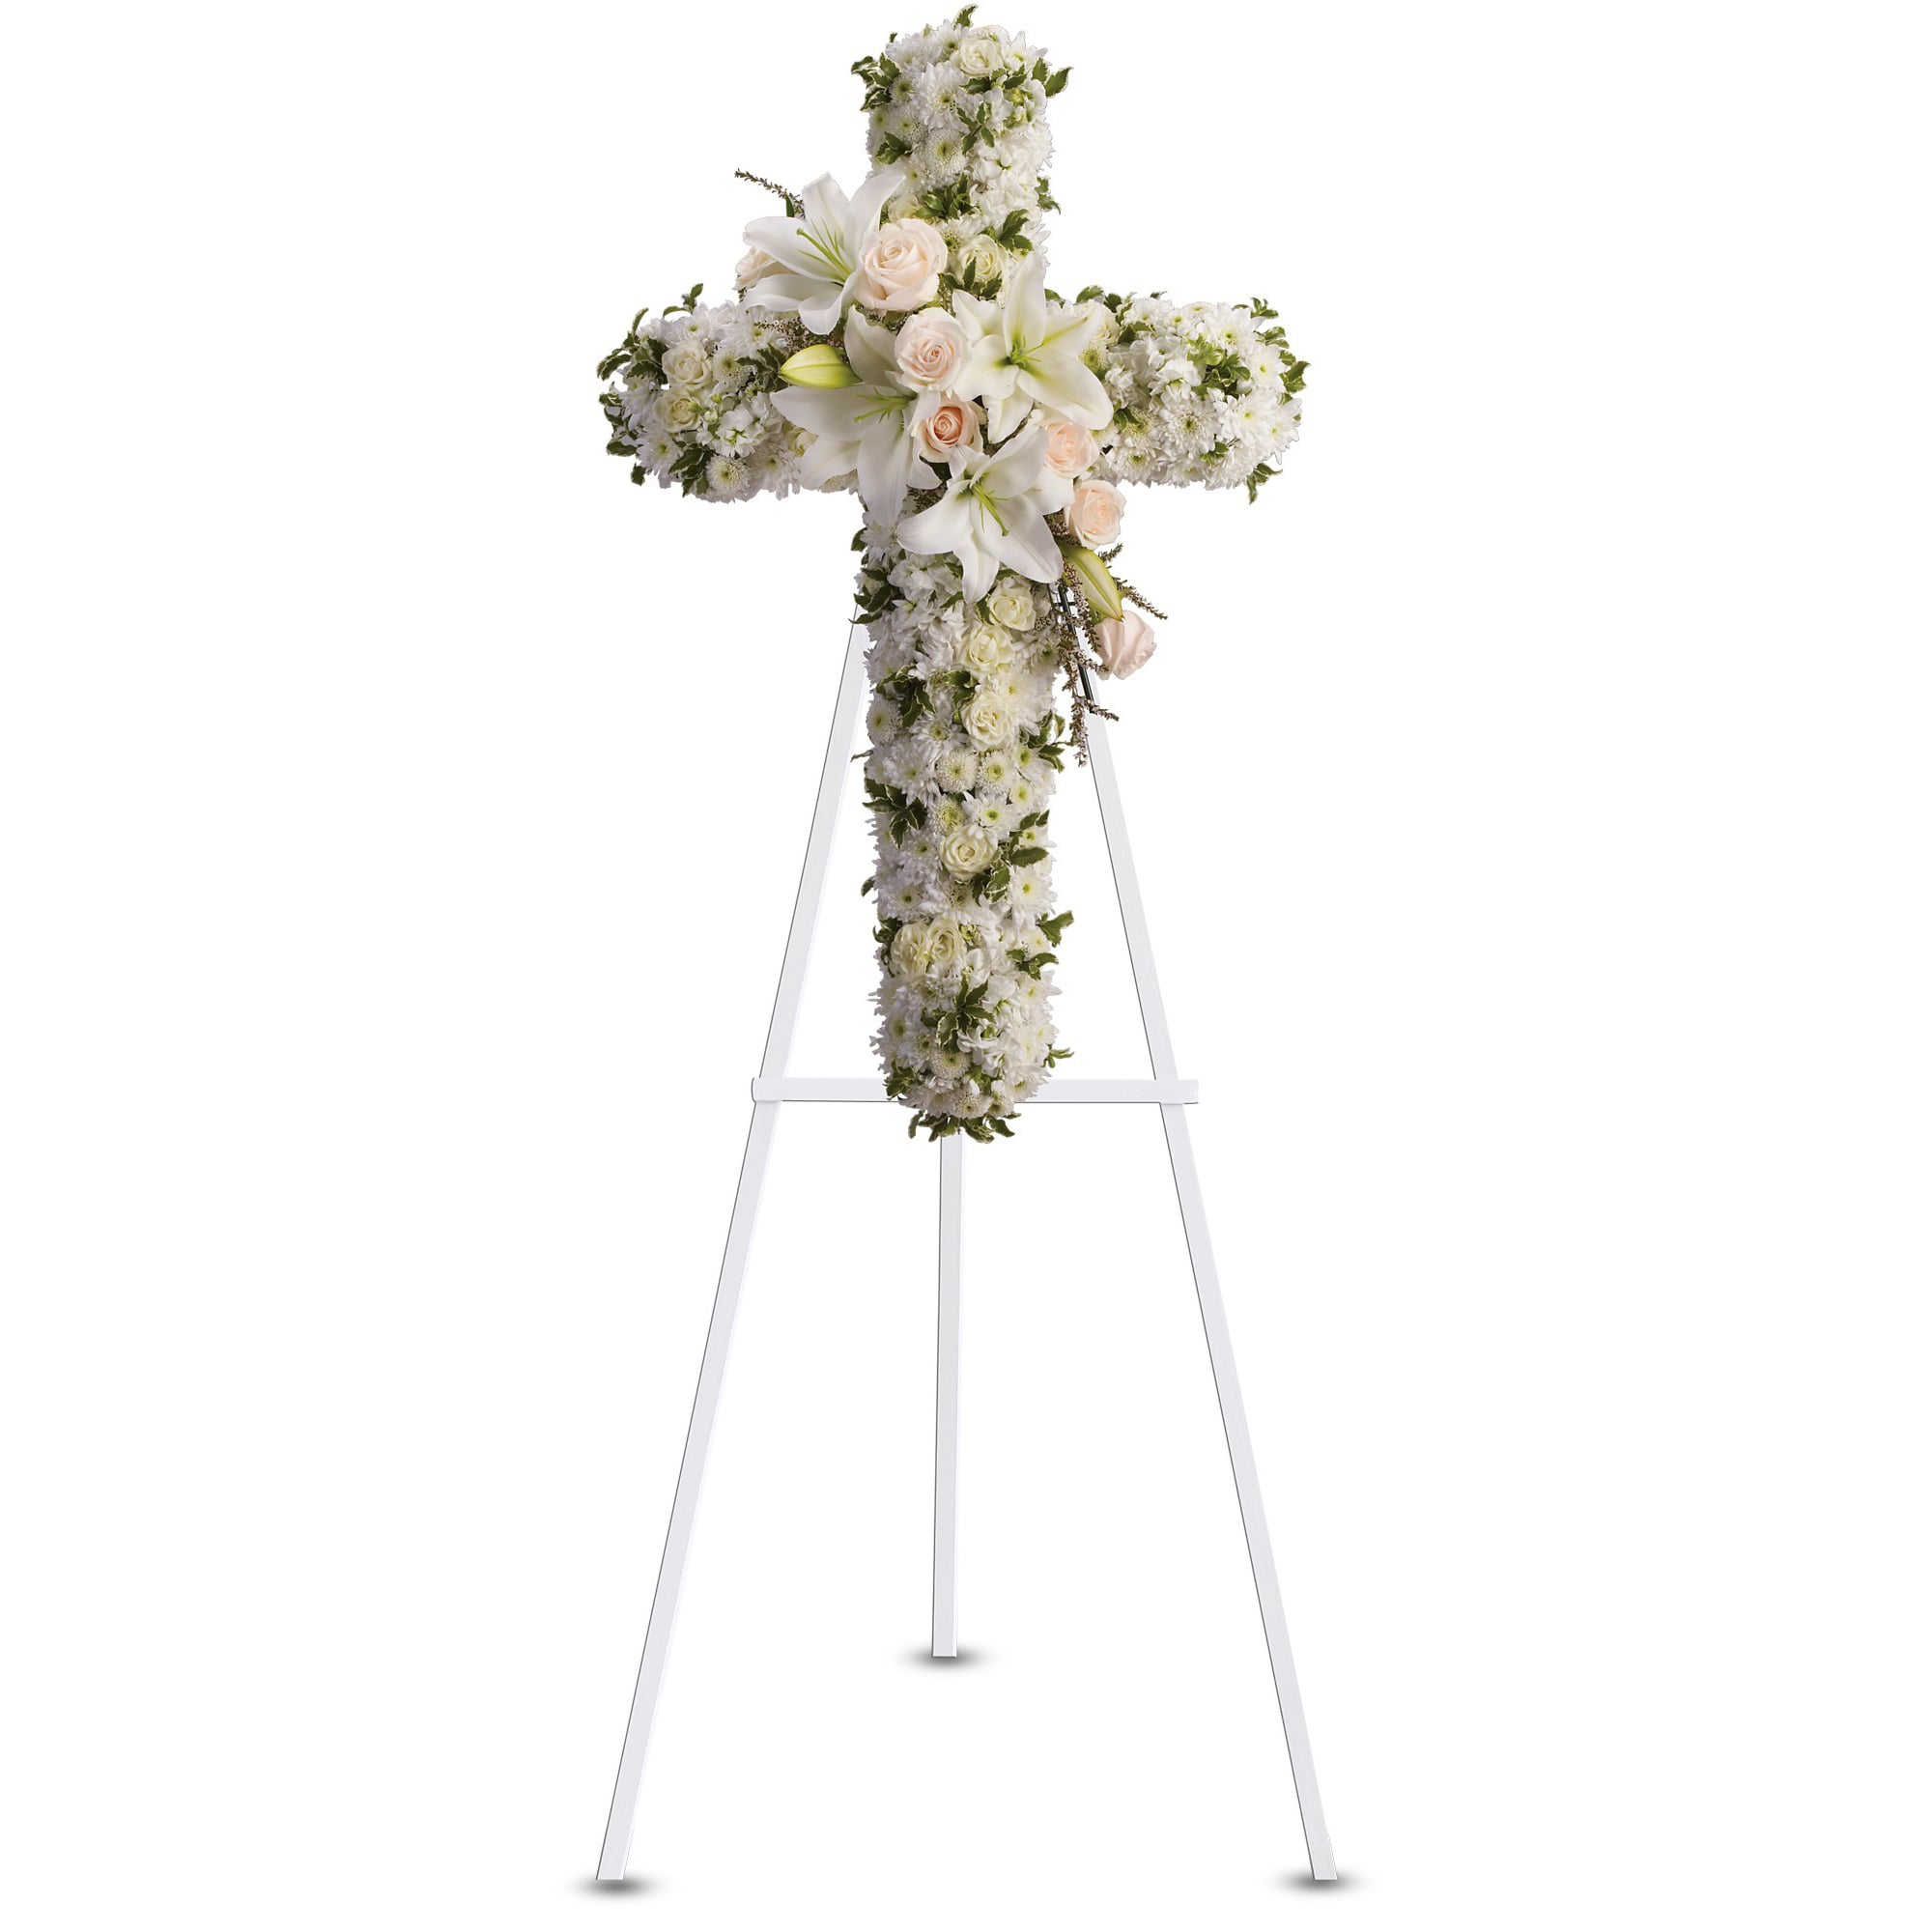 Divine Light by Teleflora - Your message of hope for eternal serenity is delivered ever so elegantly in this graceful cross. Your sincerity will be acknowledged by all who are present. We also offer this design in other colors and a mixed color combination. 